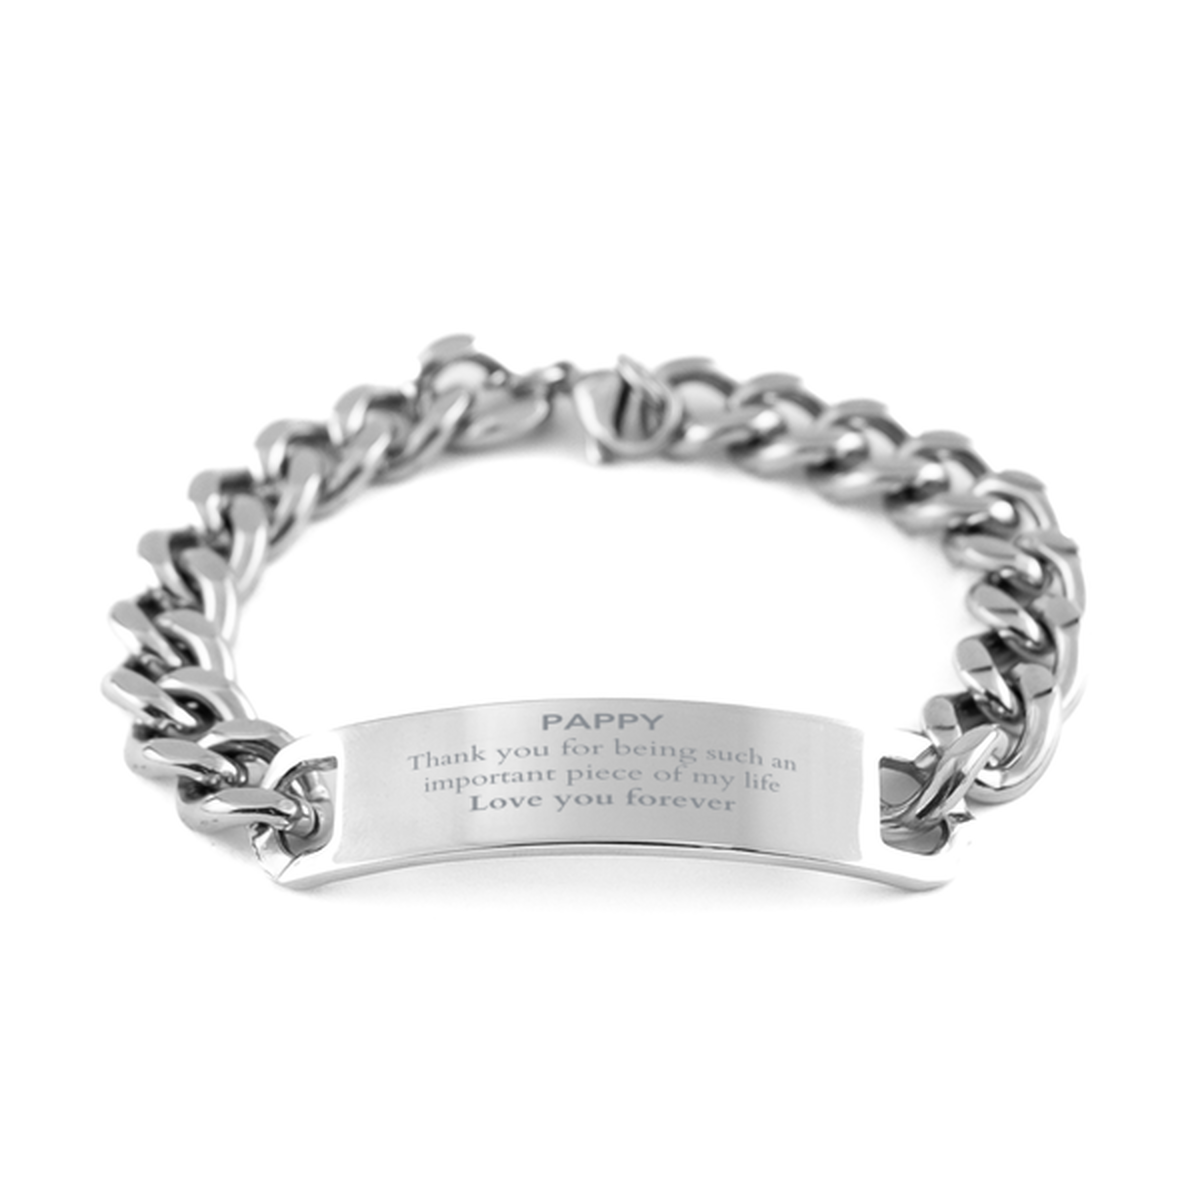 Appropriate Pappy Cuban Chain Stainless Steel Bracelet Epic Birthday Gifts for Pappy Thank you for being such an important piece of my life Pappy Christmas Mothers Fathers Day